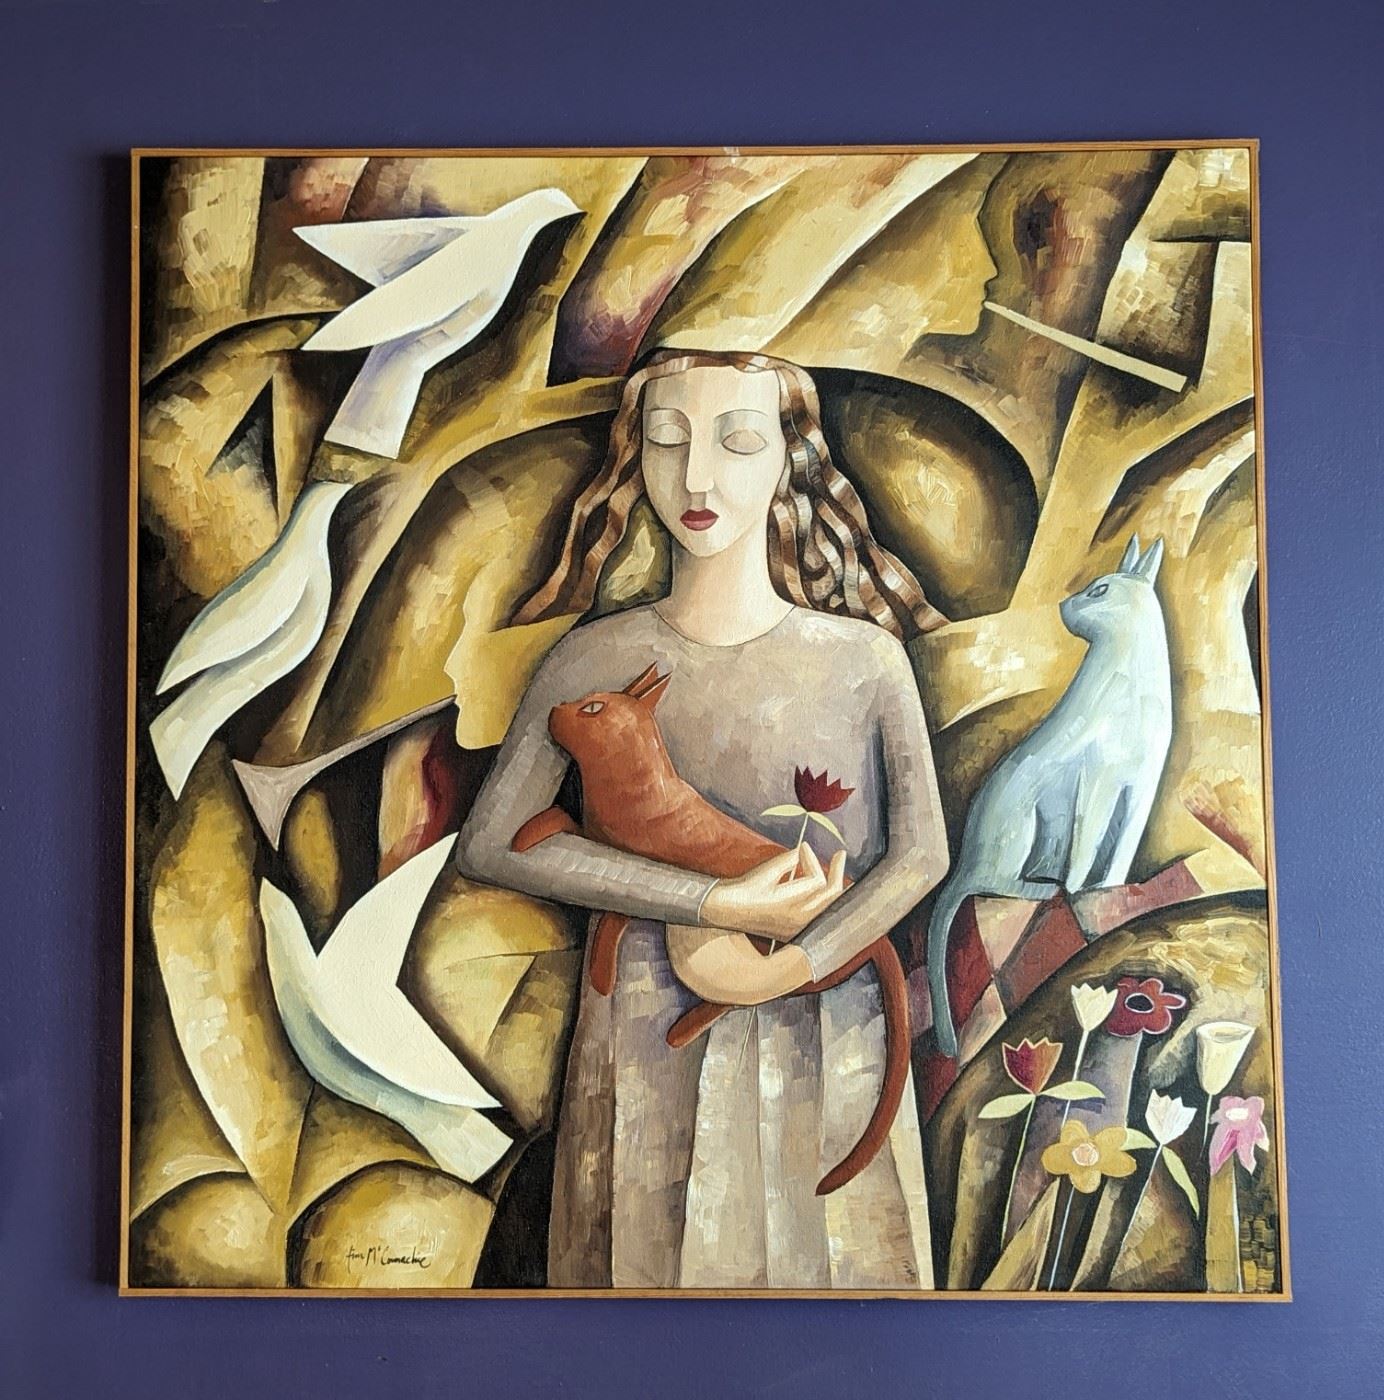 Serene Acrylic Canvas Painting by Tim McConnachie. Measures 33” x 33.5”. Unique painting by Australian artist who considers his work contemporary cubism. 